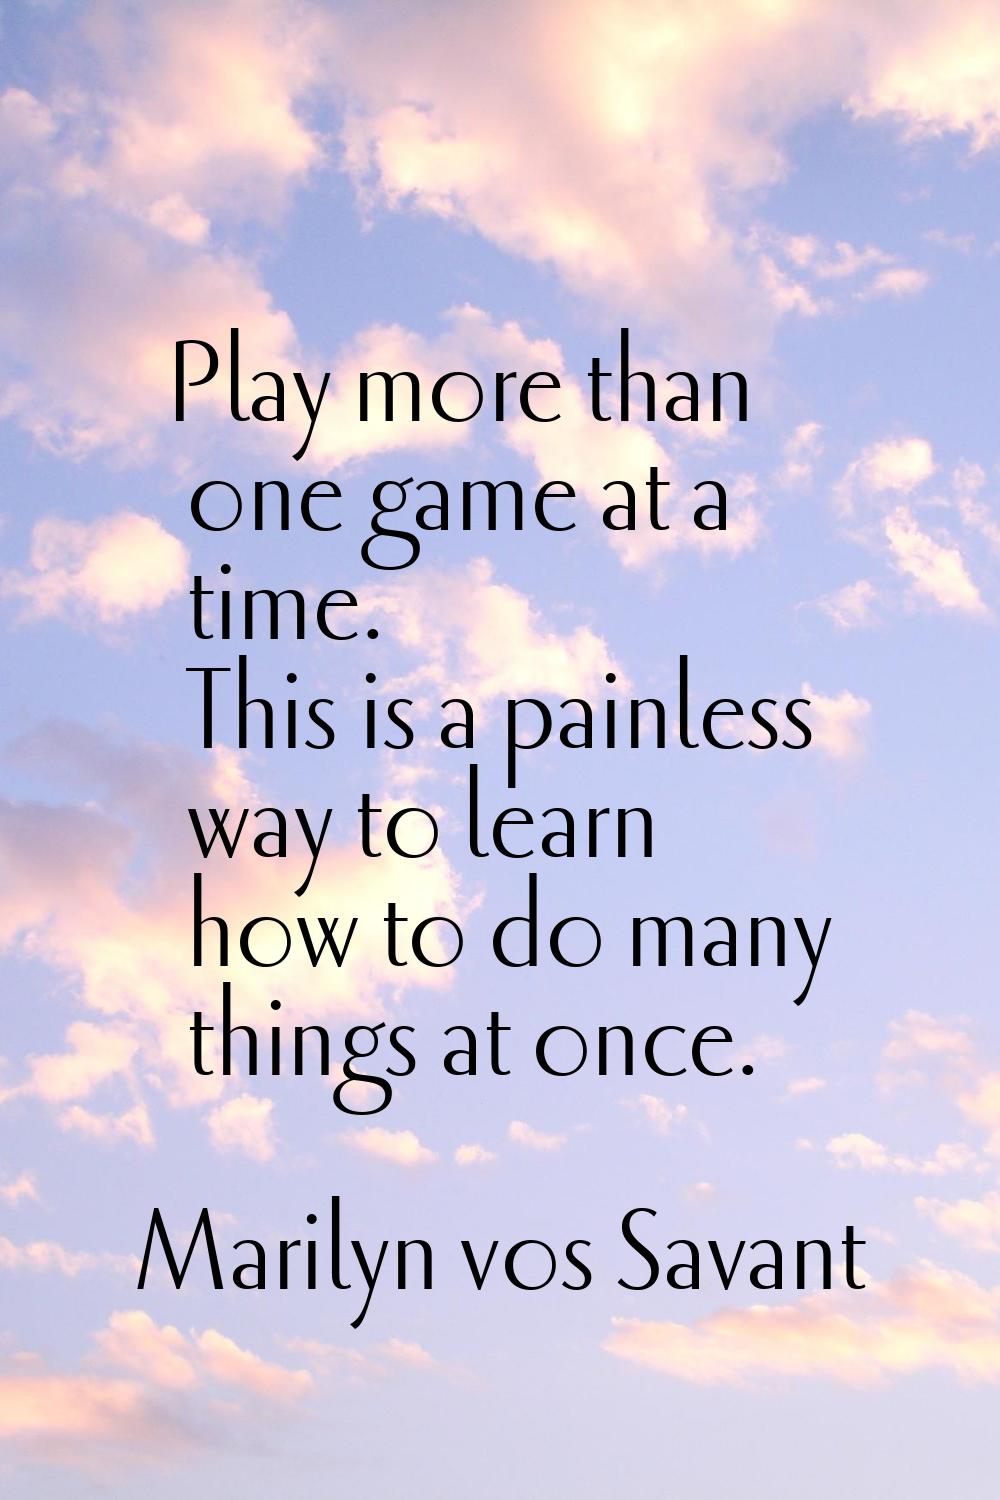 Play more than one game at a time. This is a painless way to learn how to do many things at once.